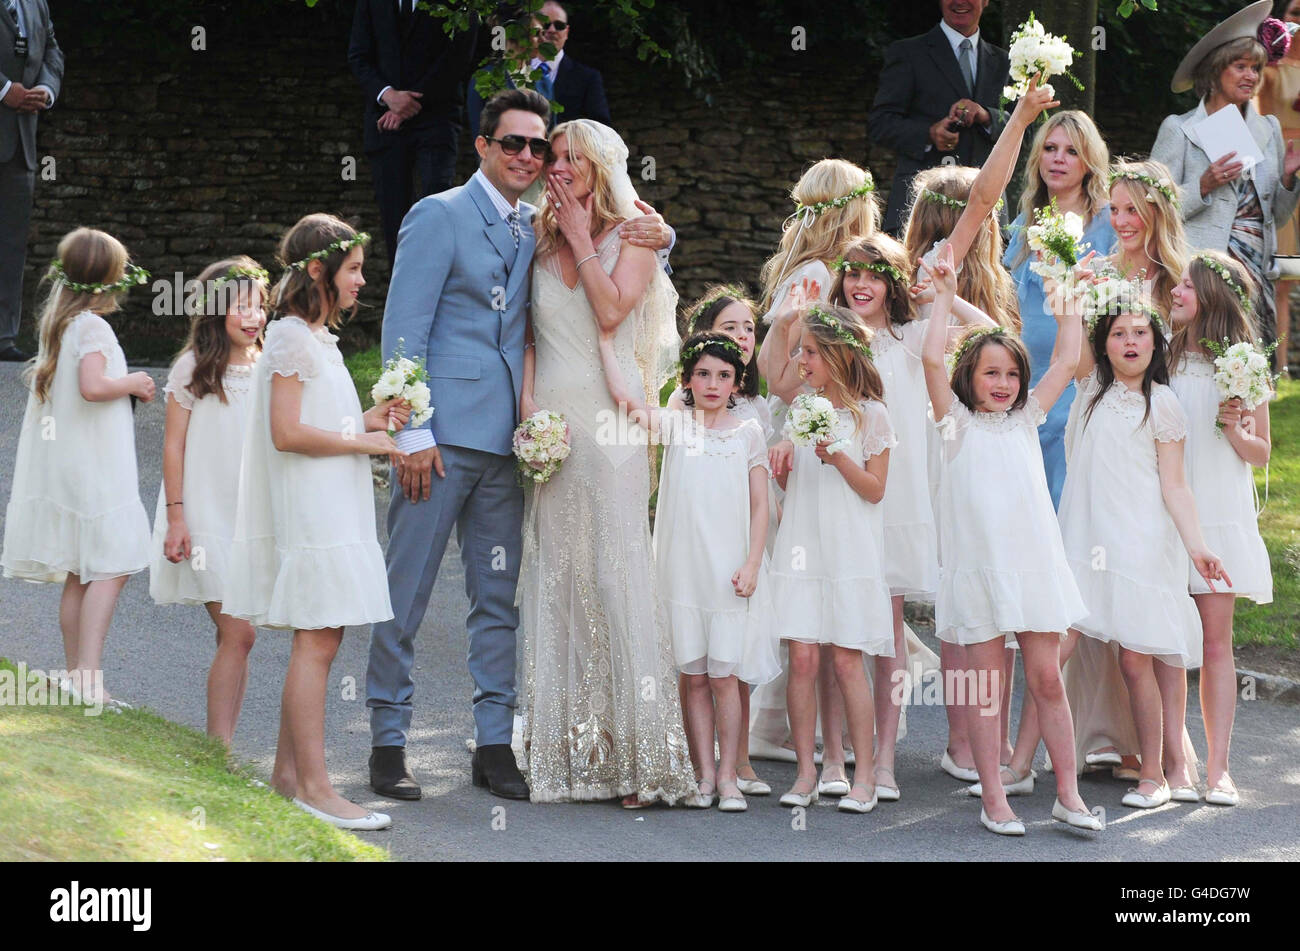 Kate Moss with her new husband Jamie Hince pose with bridesmaids after their wedding at St Peter's Church in Southrop. Stock Photo